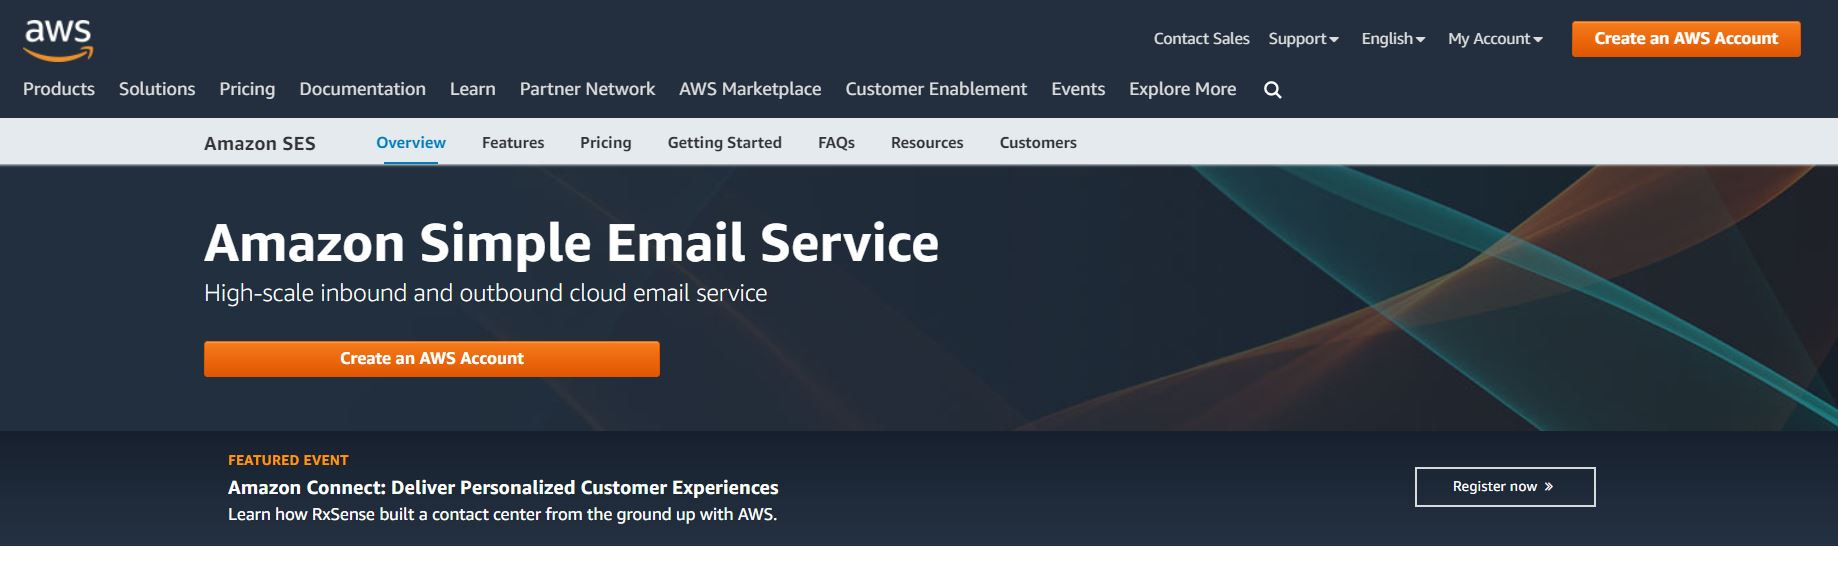 Amazon SES advanced cloud-based system makes it one of the best mass email senders